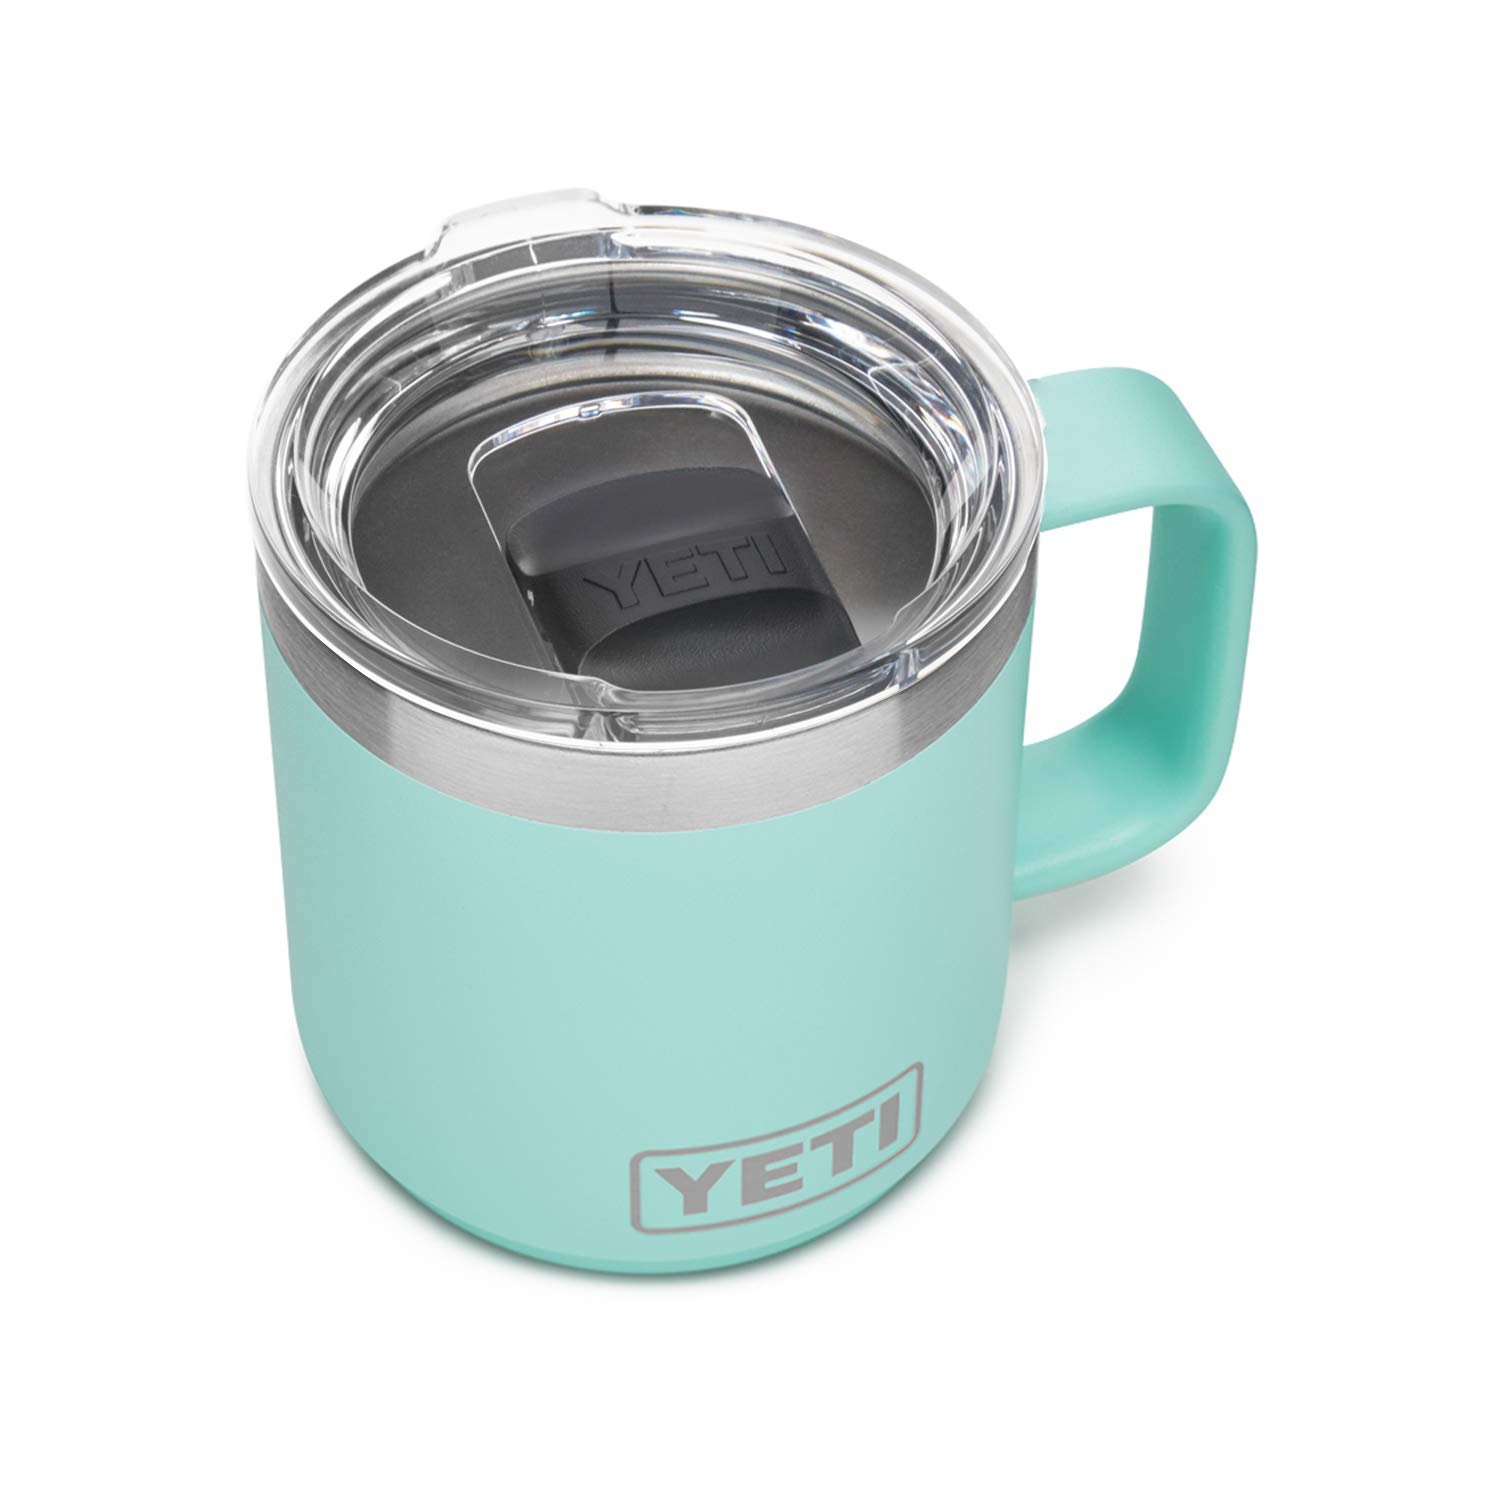 Stay Refreshed on the Go with YETI Rambler 10 oz Stackable Mug - Vacuum Insulated, Stainless Steel, MagSlider Lid, and Seafoam Design.